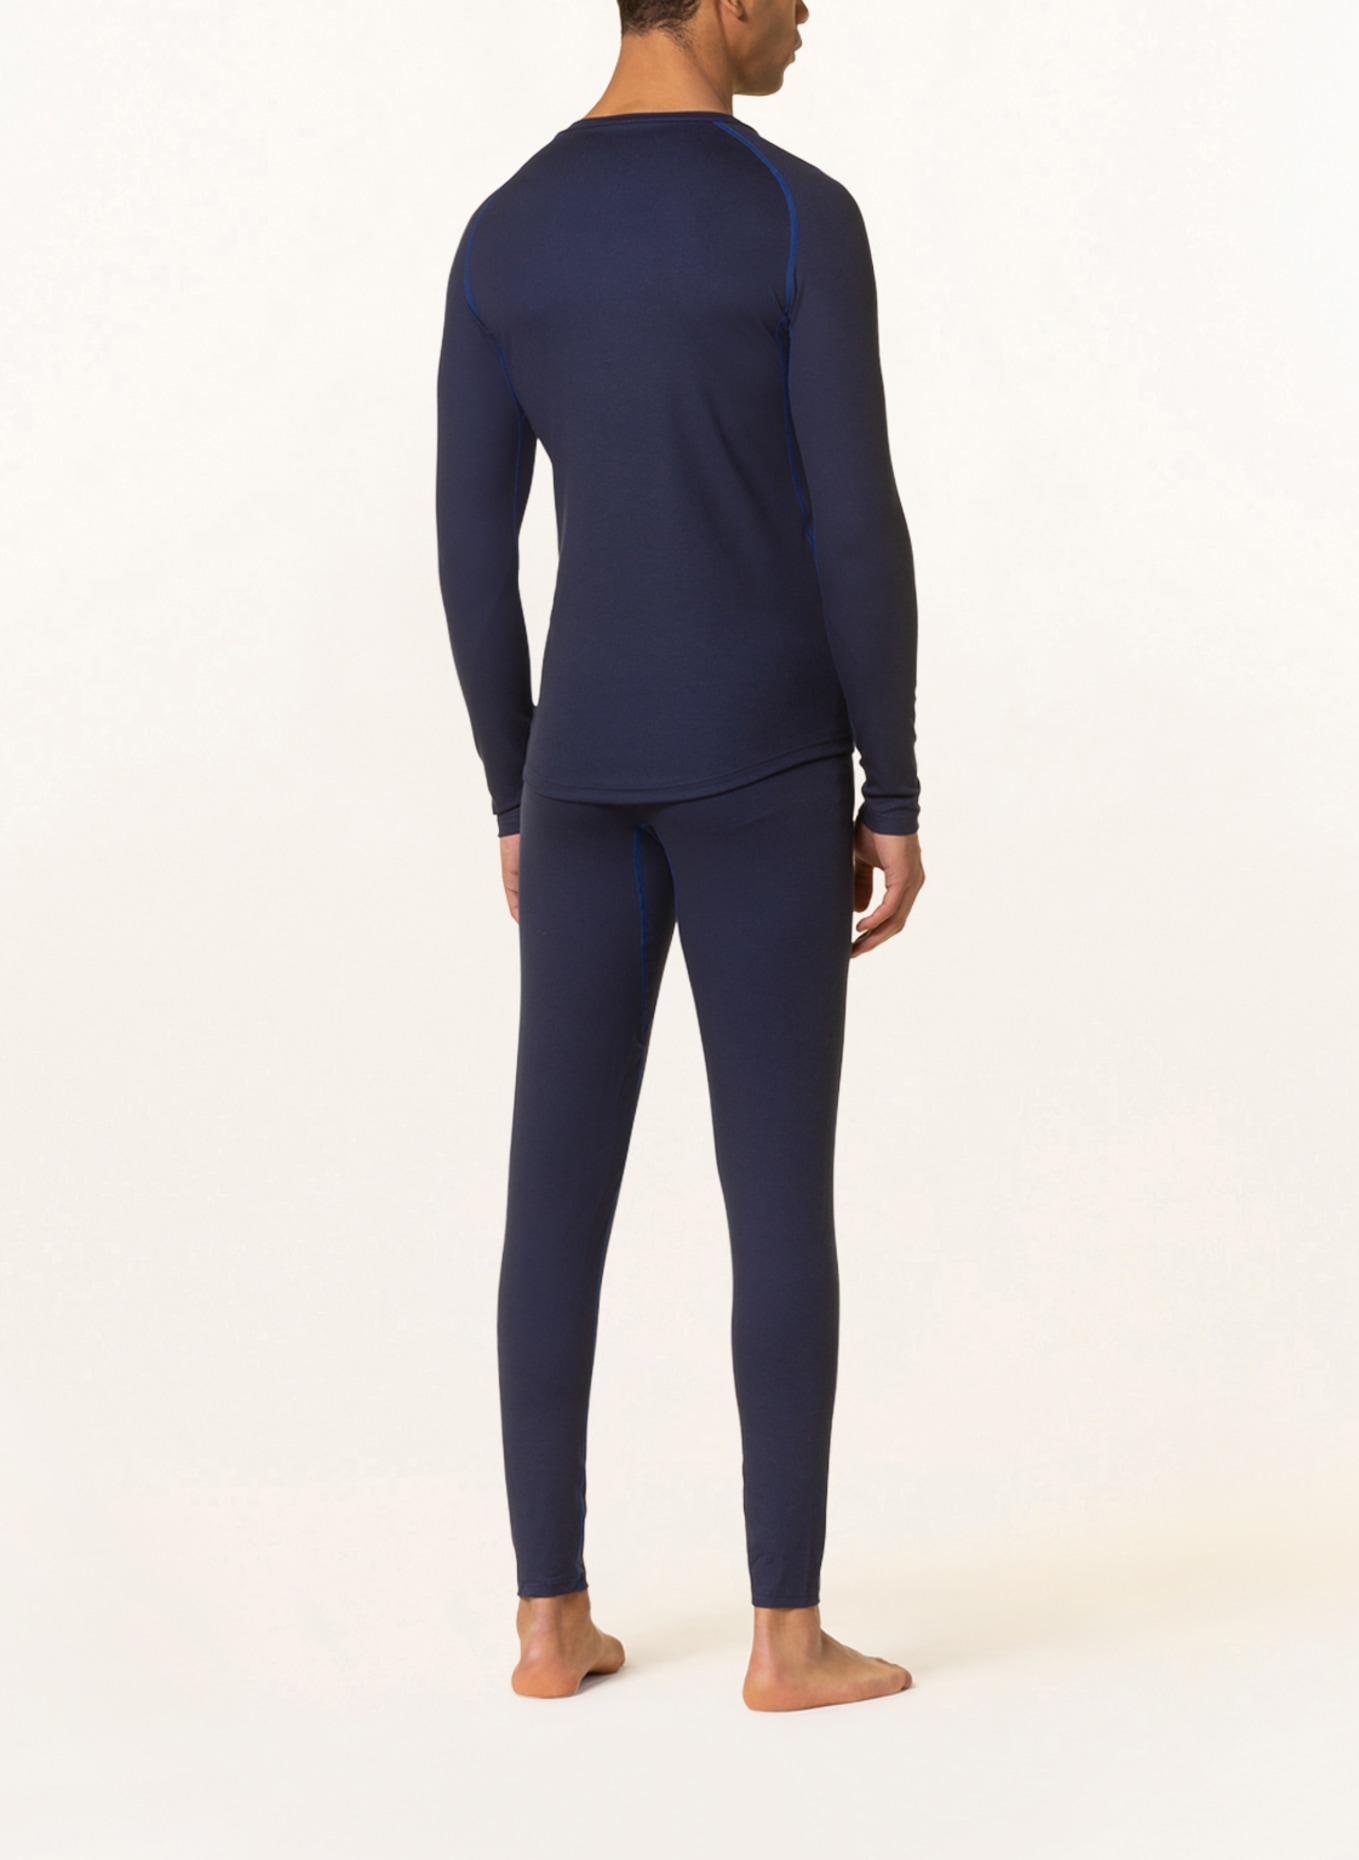 mey Functional underwear trousers series HIGH PERFORMANCE , Color: DARK BLUE (Image 3)